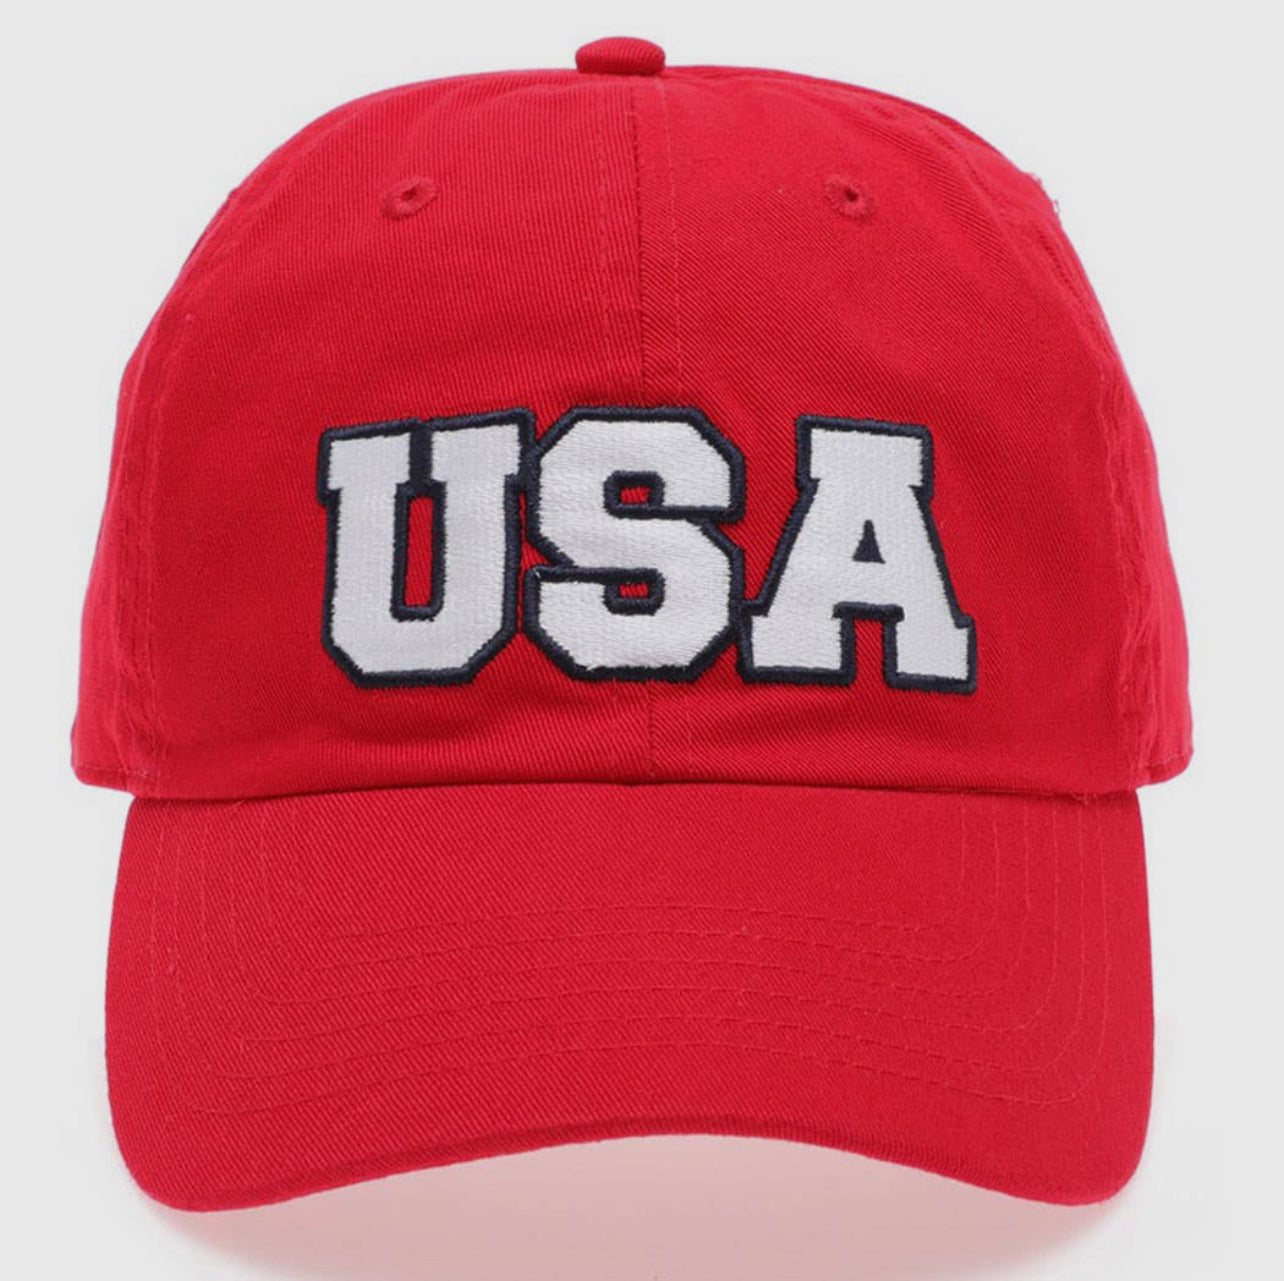 USA hat (red)